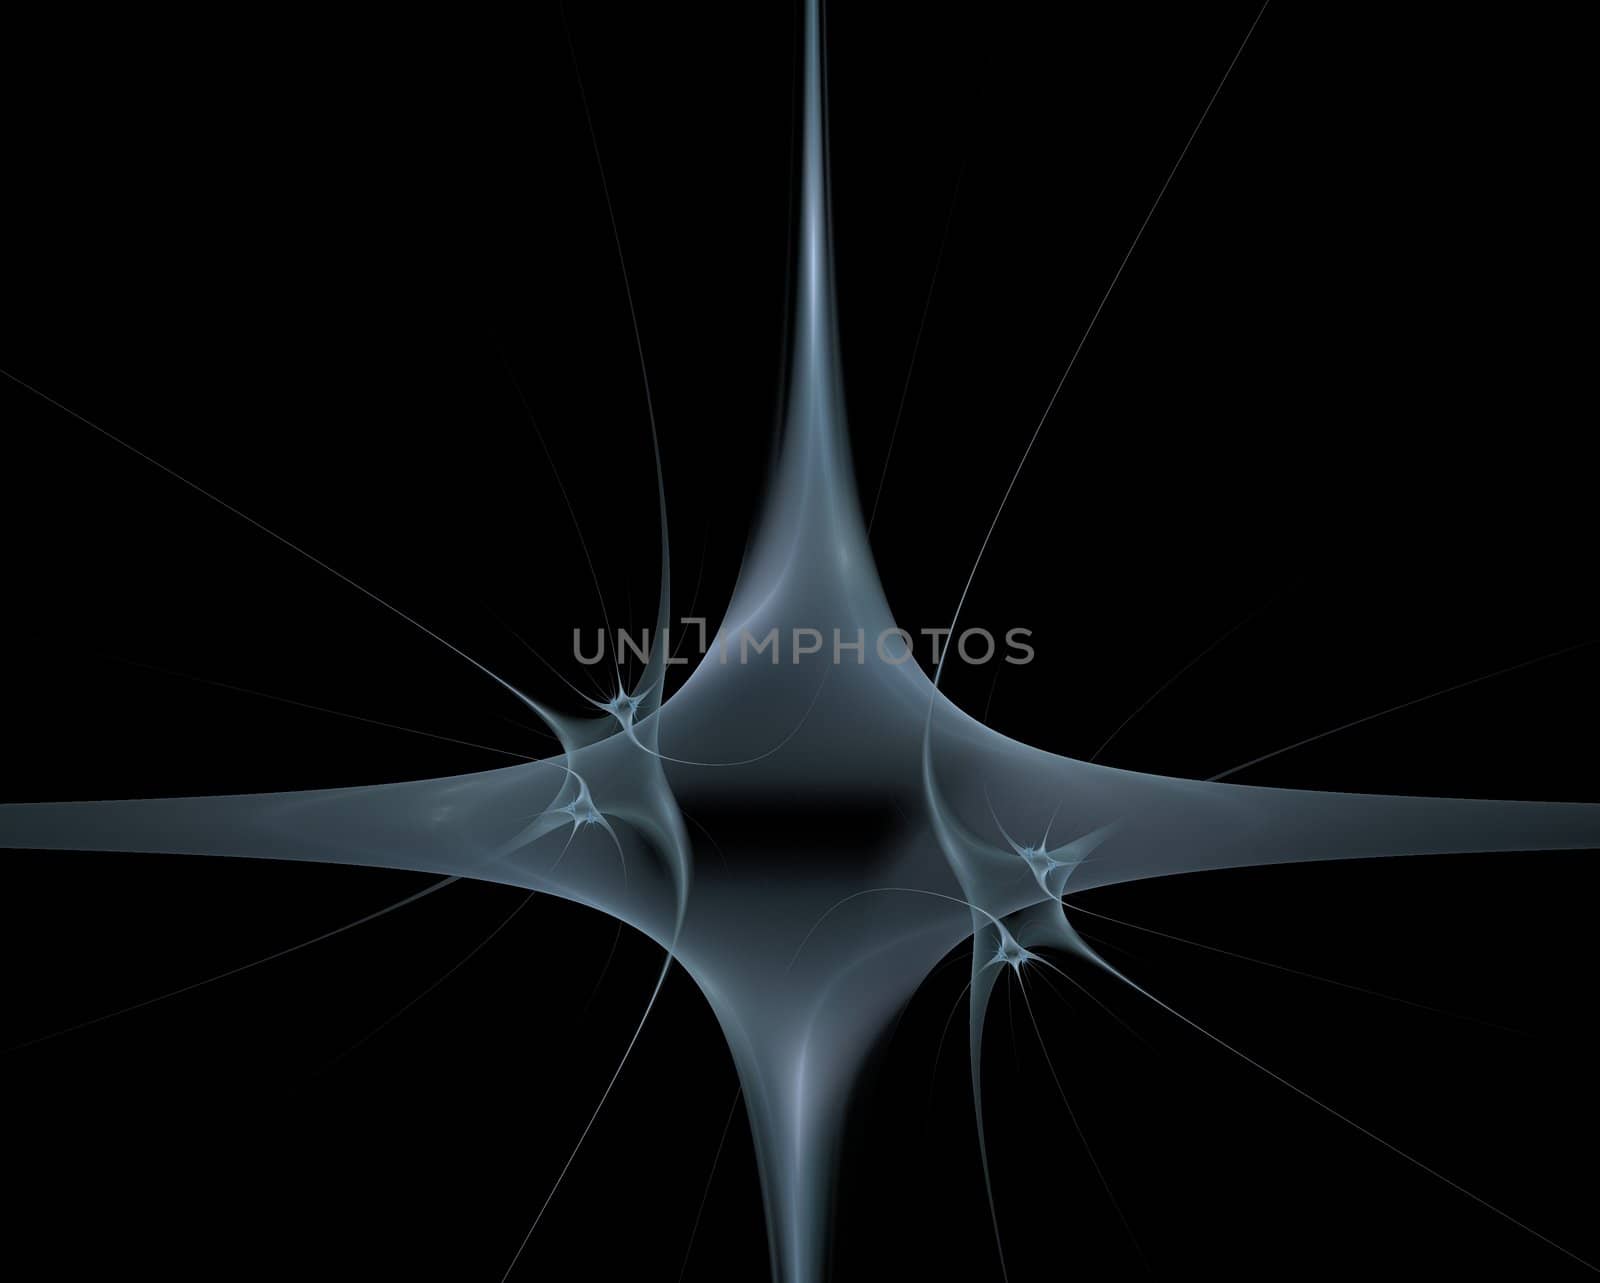 Abstract figure like tentacles on a black background